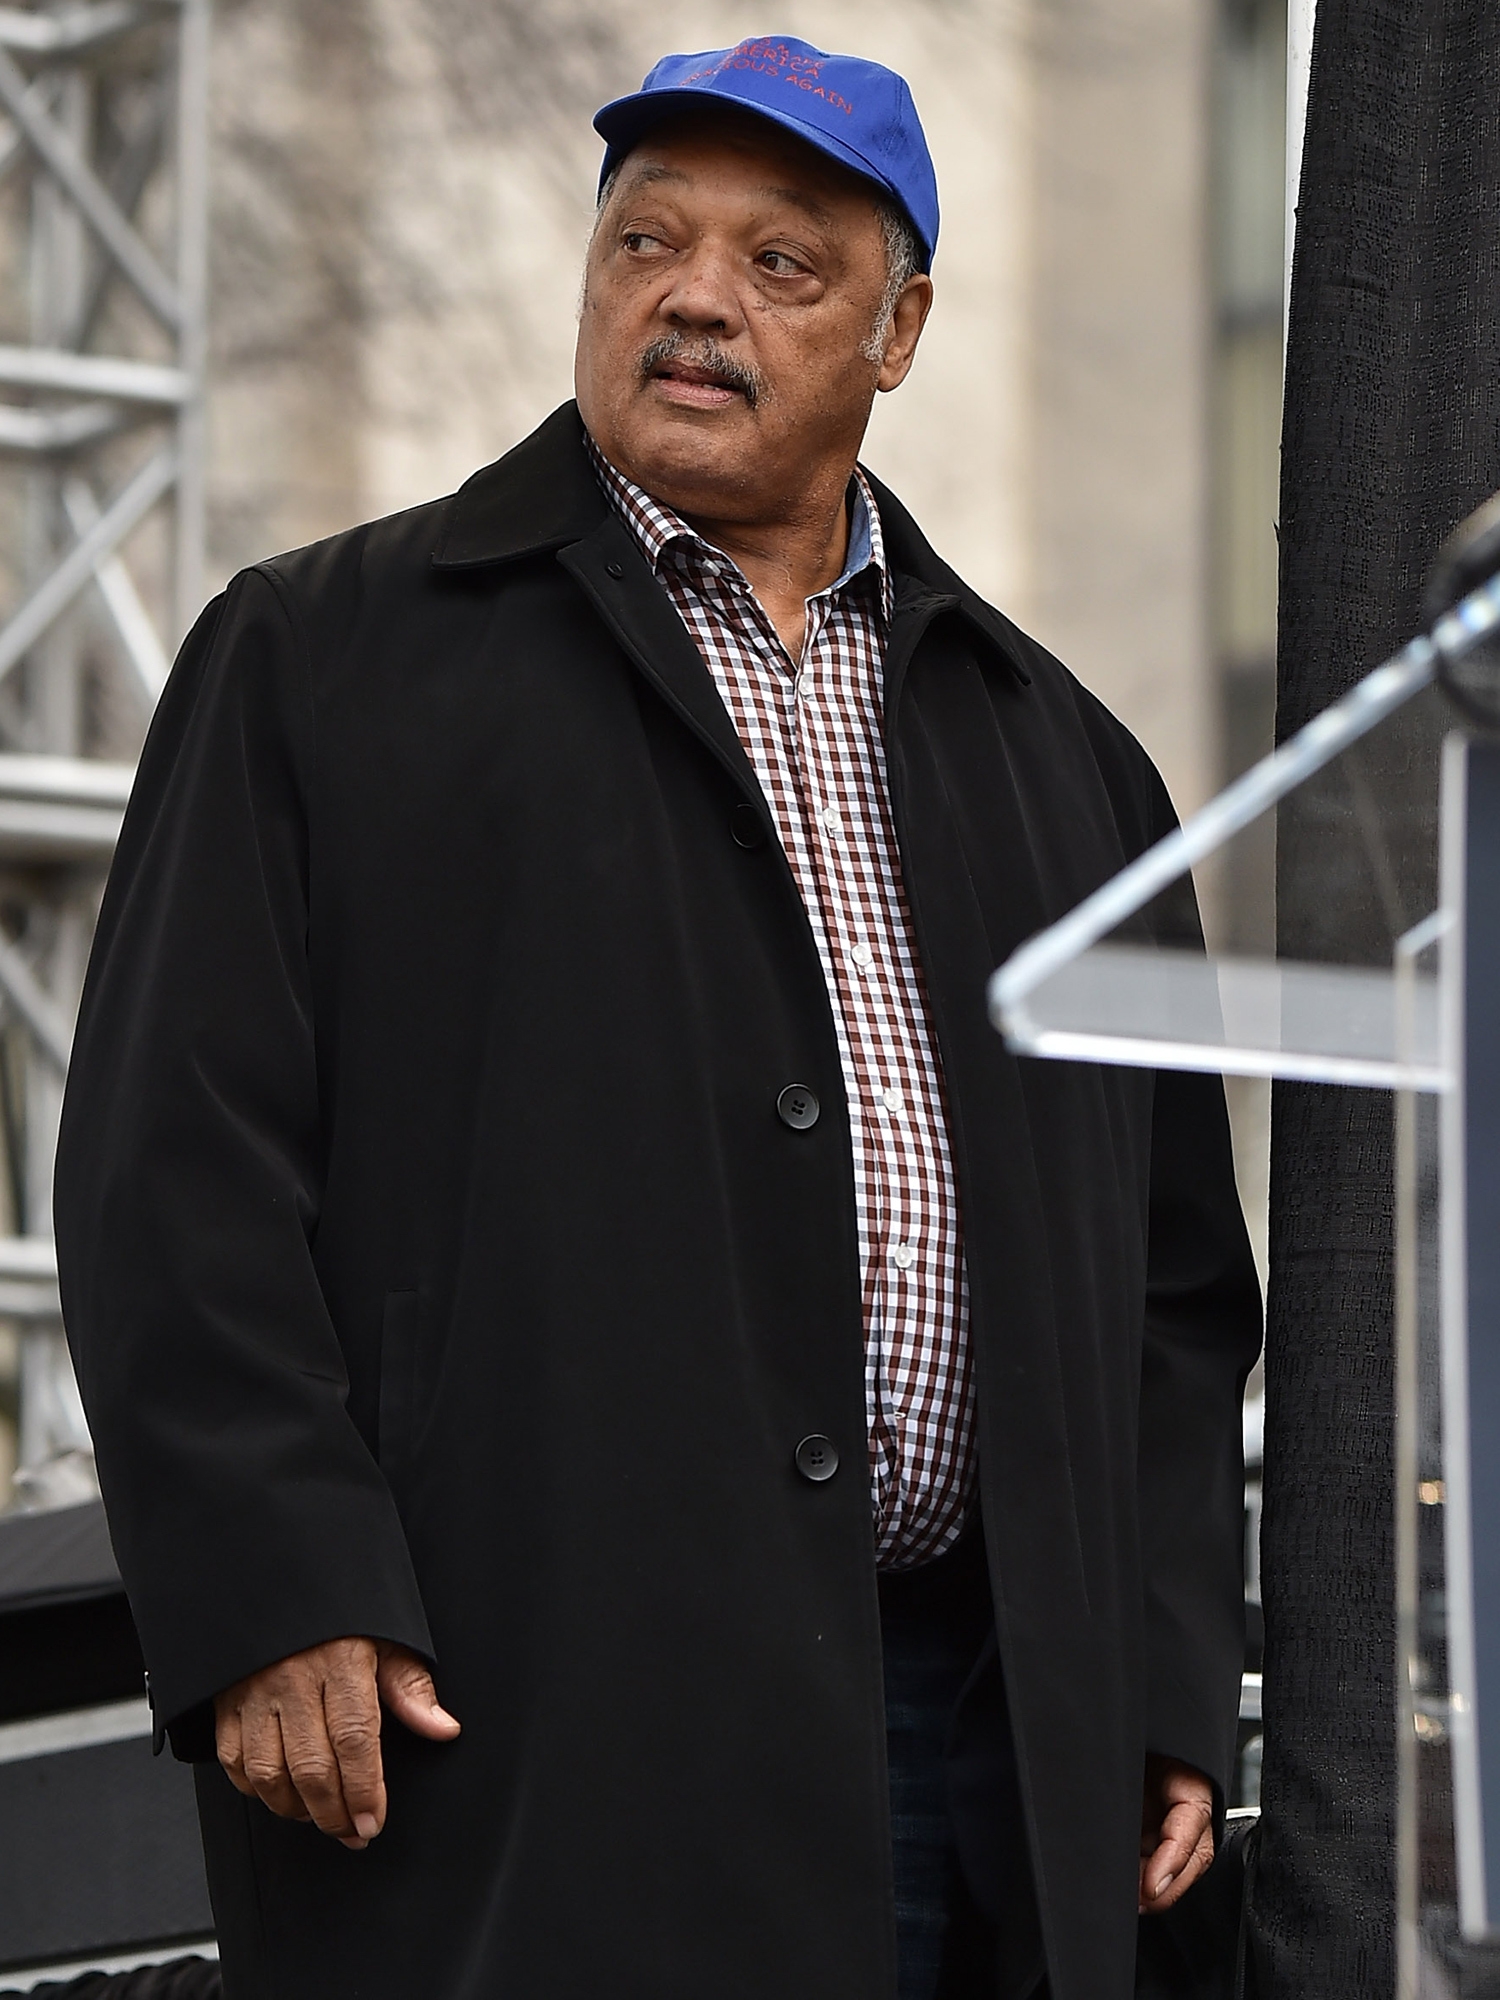 Jesse Jackson at Women’s March: ’50 Years of Civil Rights Have Been Threatened